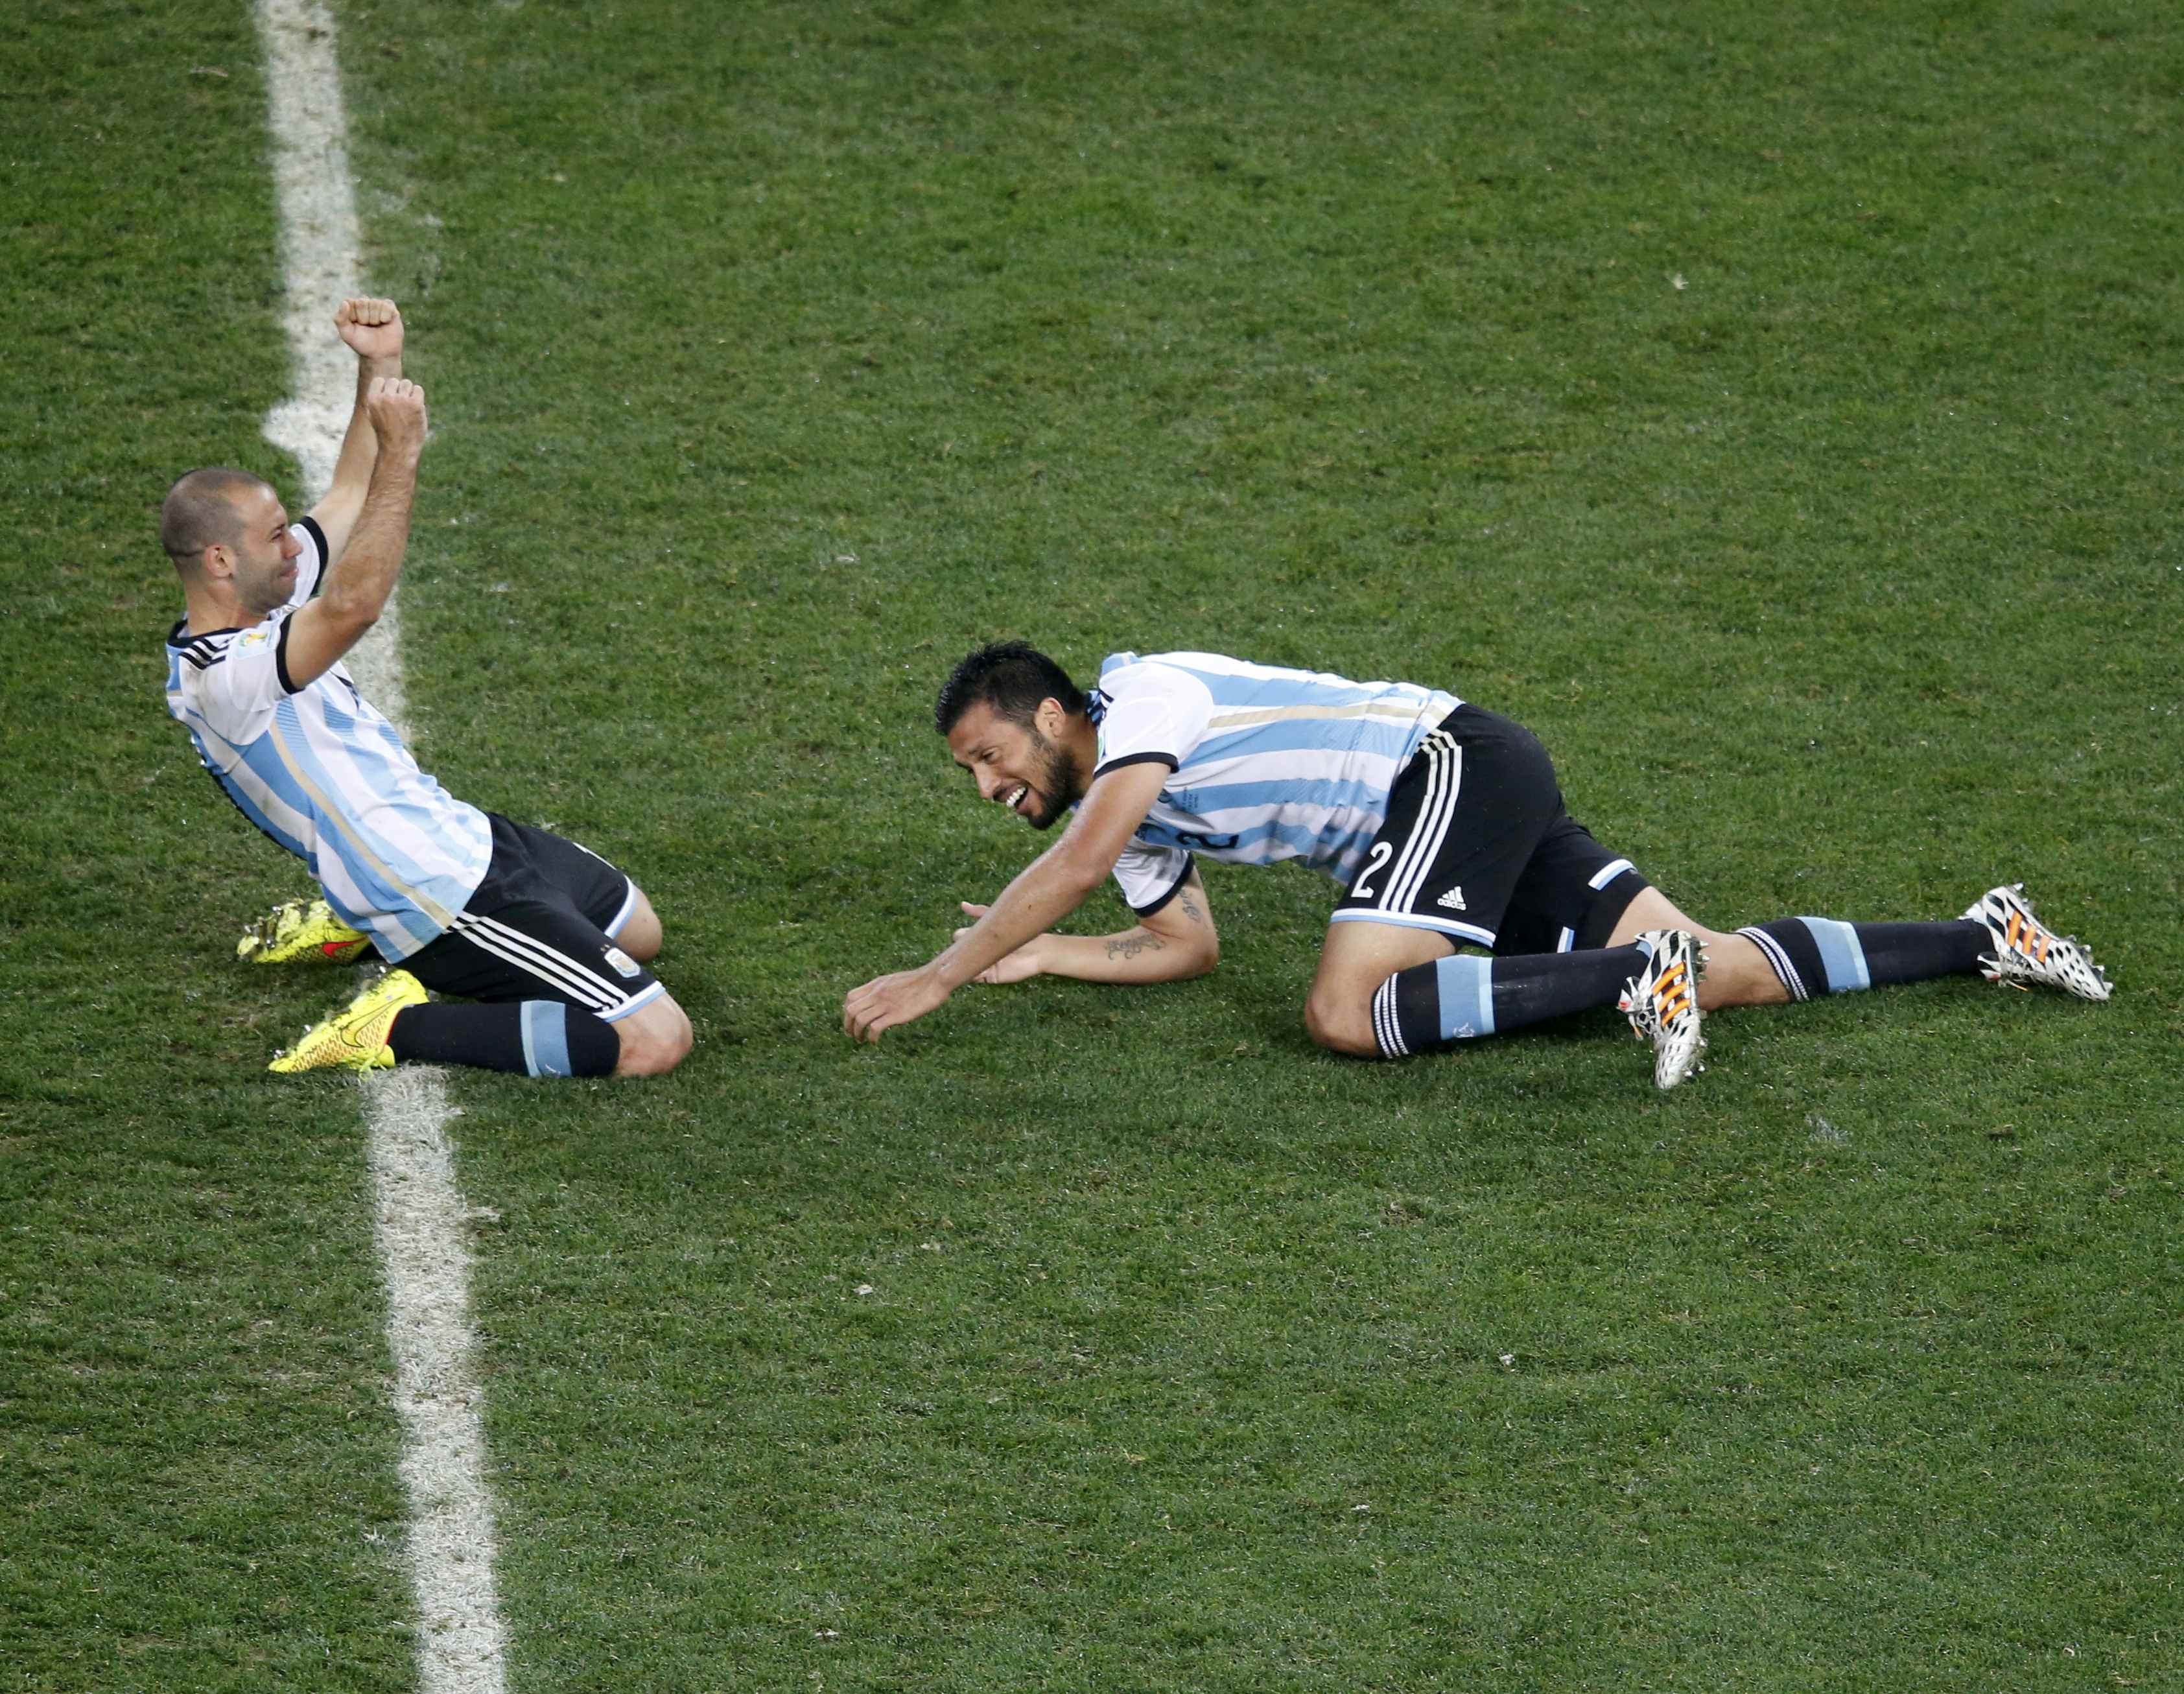 Argentina's Javier Mascherano (L) and Ezequiel Garay celebrate winning their 2014 World Cup semi-finals against the Netherlands at the Corinthians arena in Sao Paulo July 9, 2014.  REUTERS/Paulo Whitaker (BRAZIL  - Tags: SOCCER SPORT WORLD CUP TPX IMAGES 